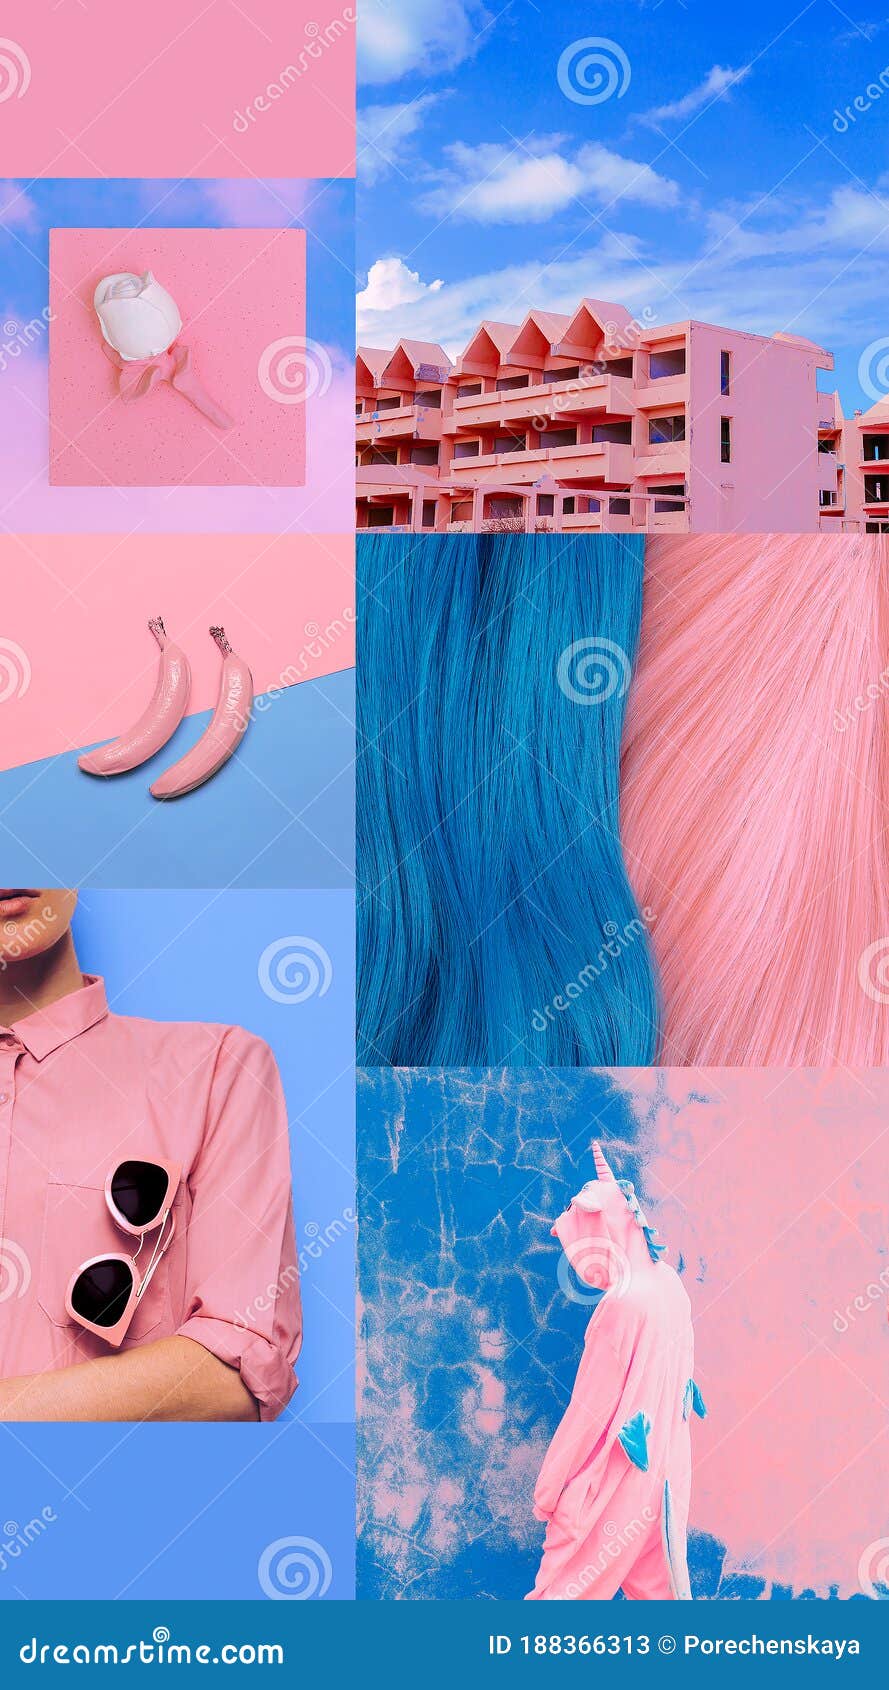 Fashion Aesthetic Moodboard. Pink and Blue Pastel Mood Stock Image - Image  of board, blue: 188366313